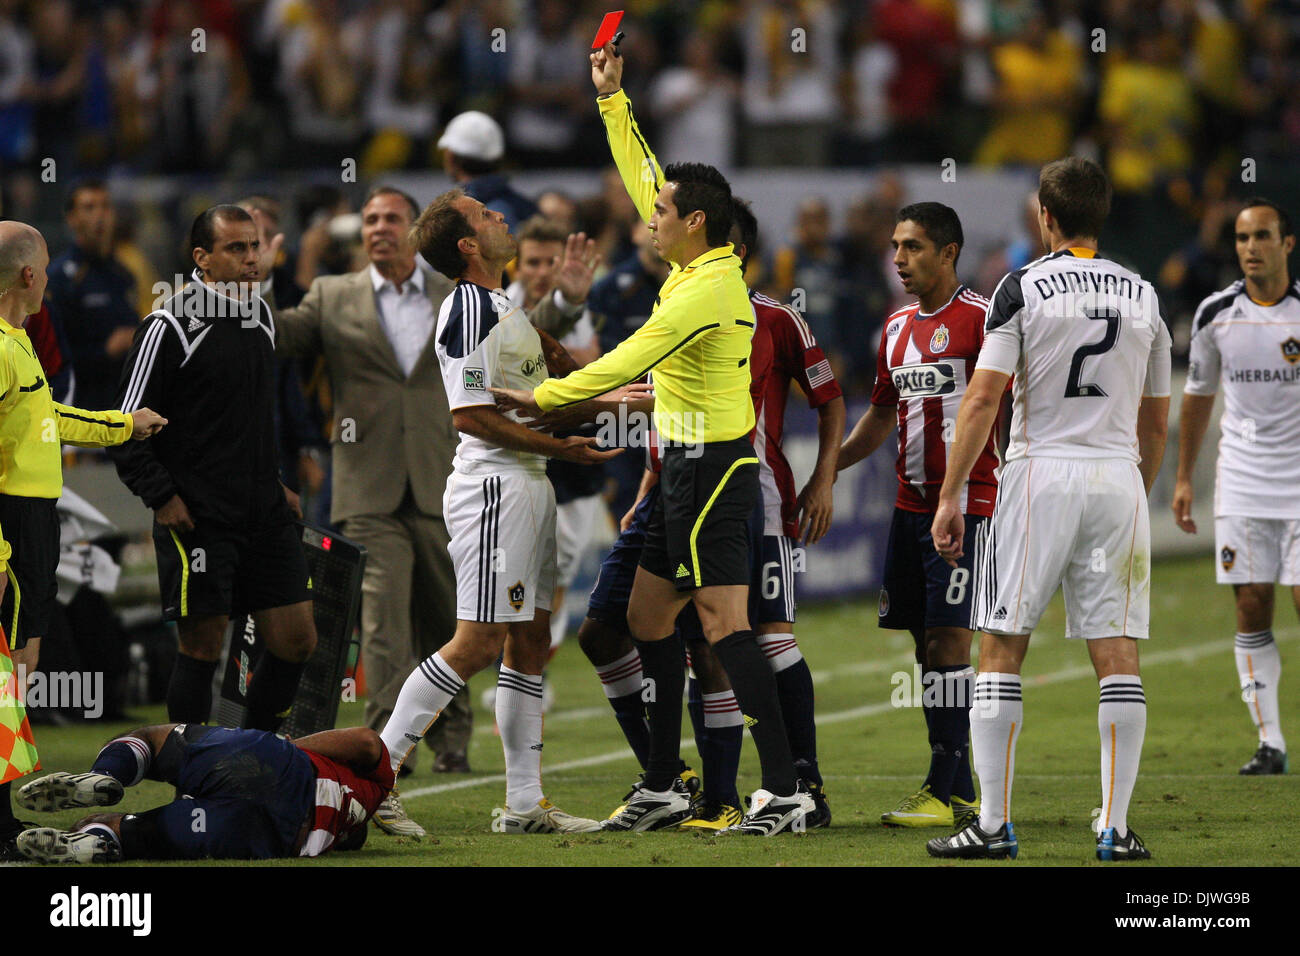 Oct. 3, 2010 - Carson, California, United States of America - Los Angeles Galaxy midfielder Eddie Lewis #6 (L) gets red carded during the Chivas USA vs Los Angeles Galaxy game at the Home Depot Center. The Galaxy went on to defeat Club Depotivo Chivas USA with final score of 2-1. (Credit Image: © Brandon Parry/Southcreek Global/ZUMApress.com) Stock Photo